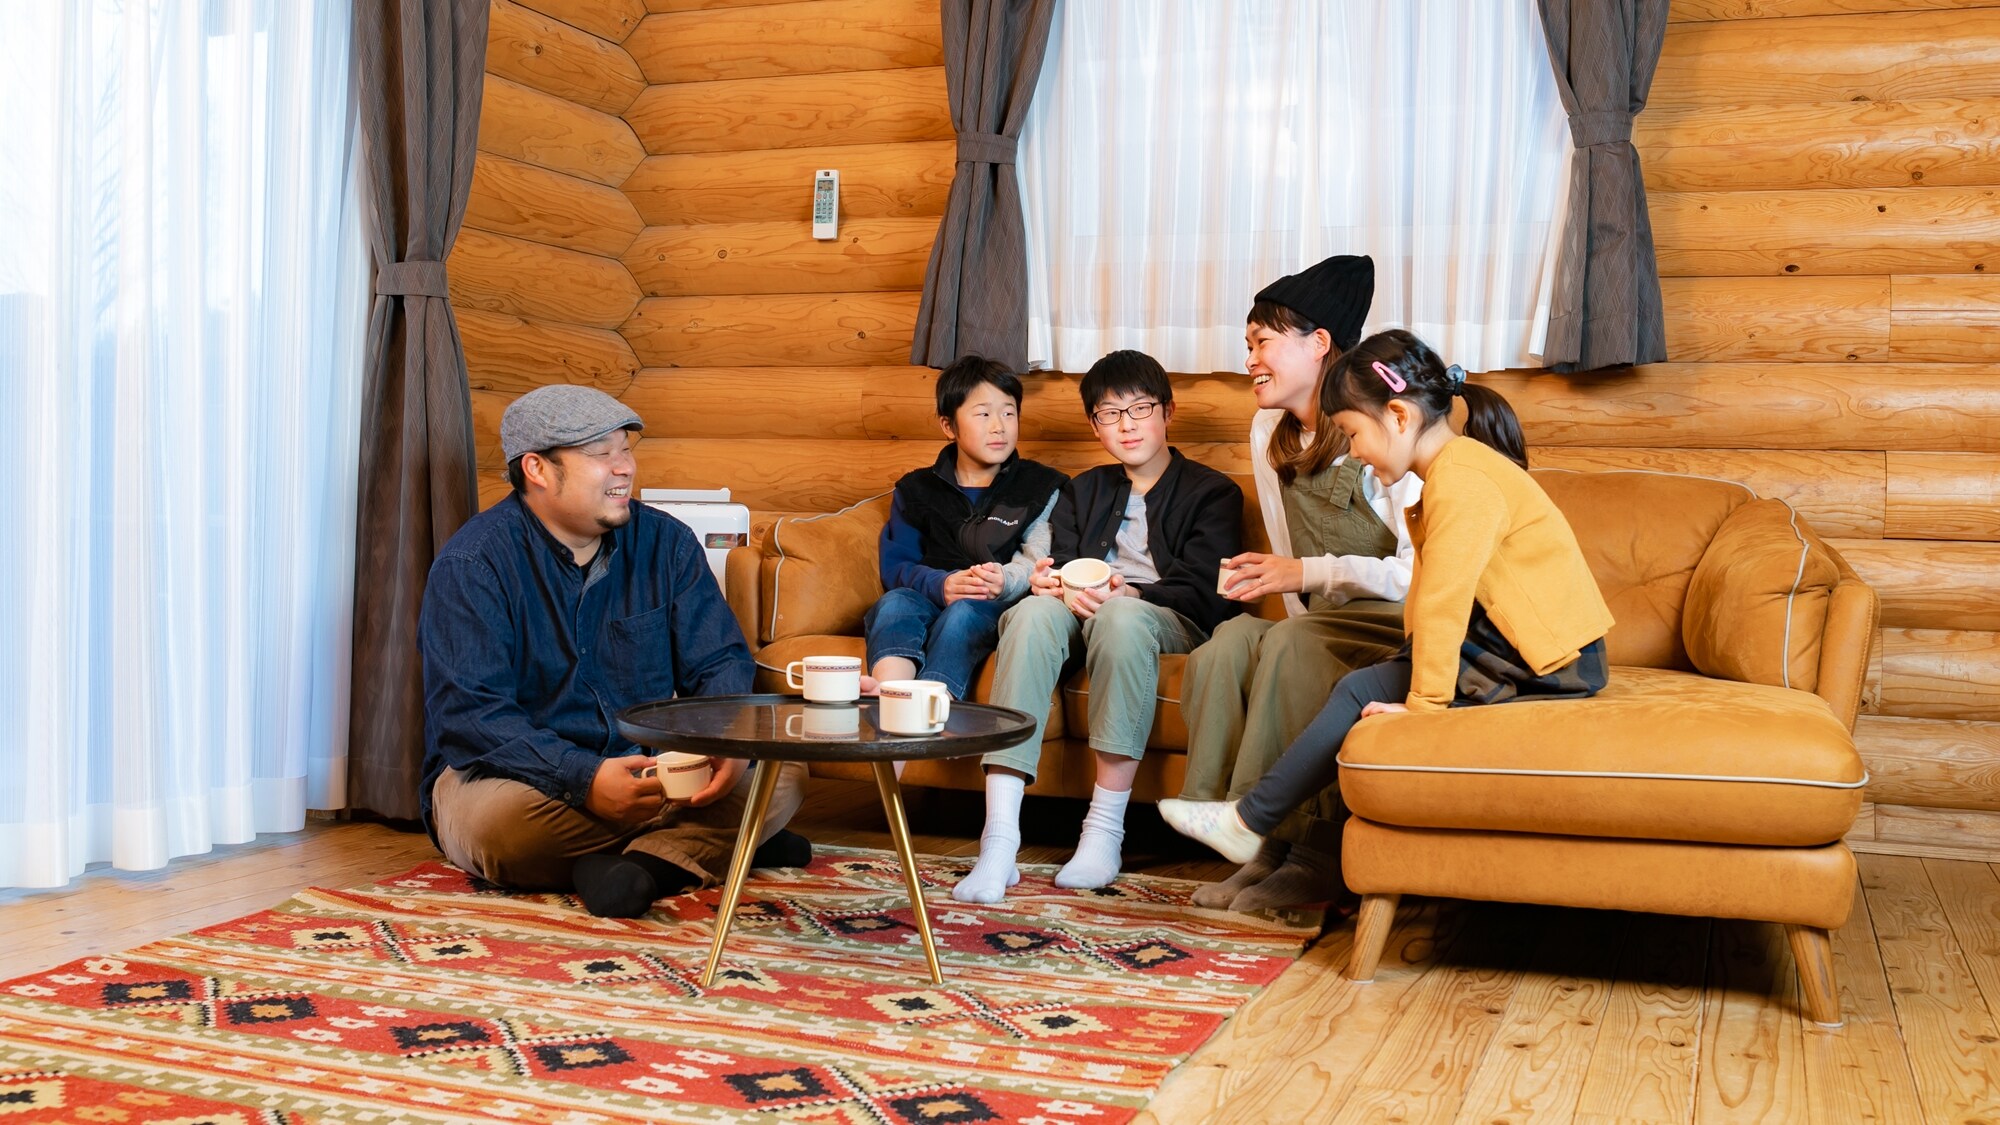 *[Log house] Enjoy a relaxing time with your family. Let's talk a lot about what was fun and happy today♪